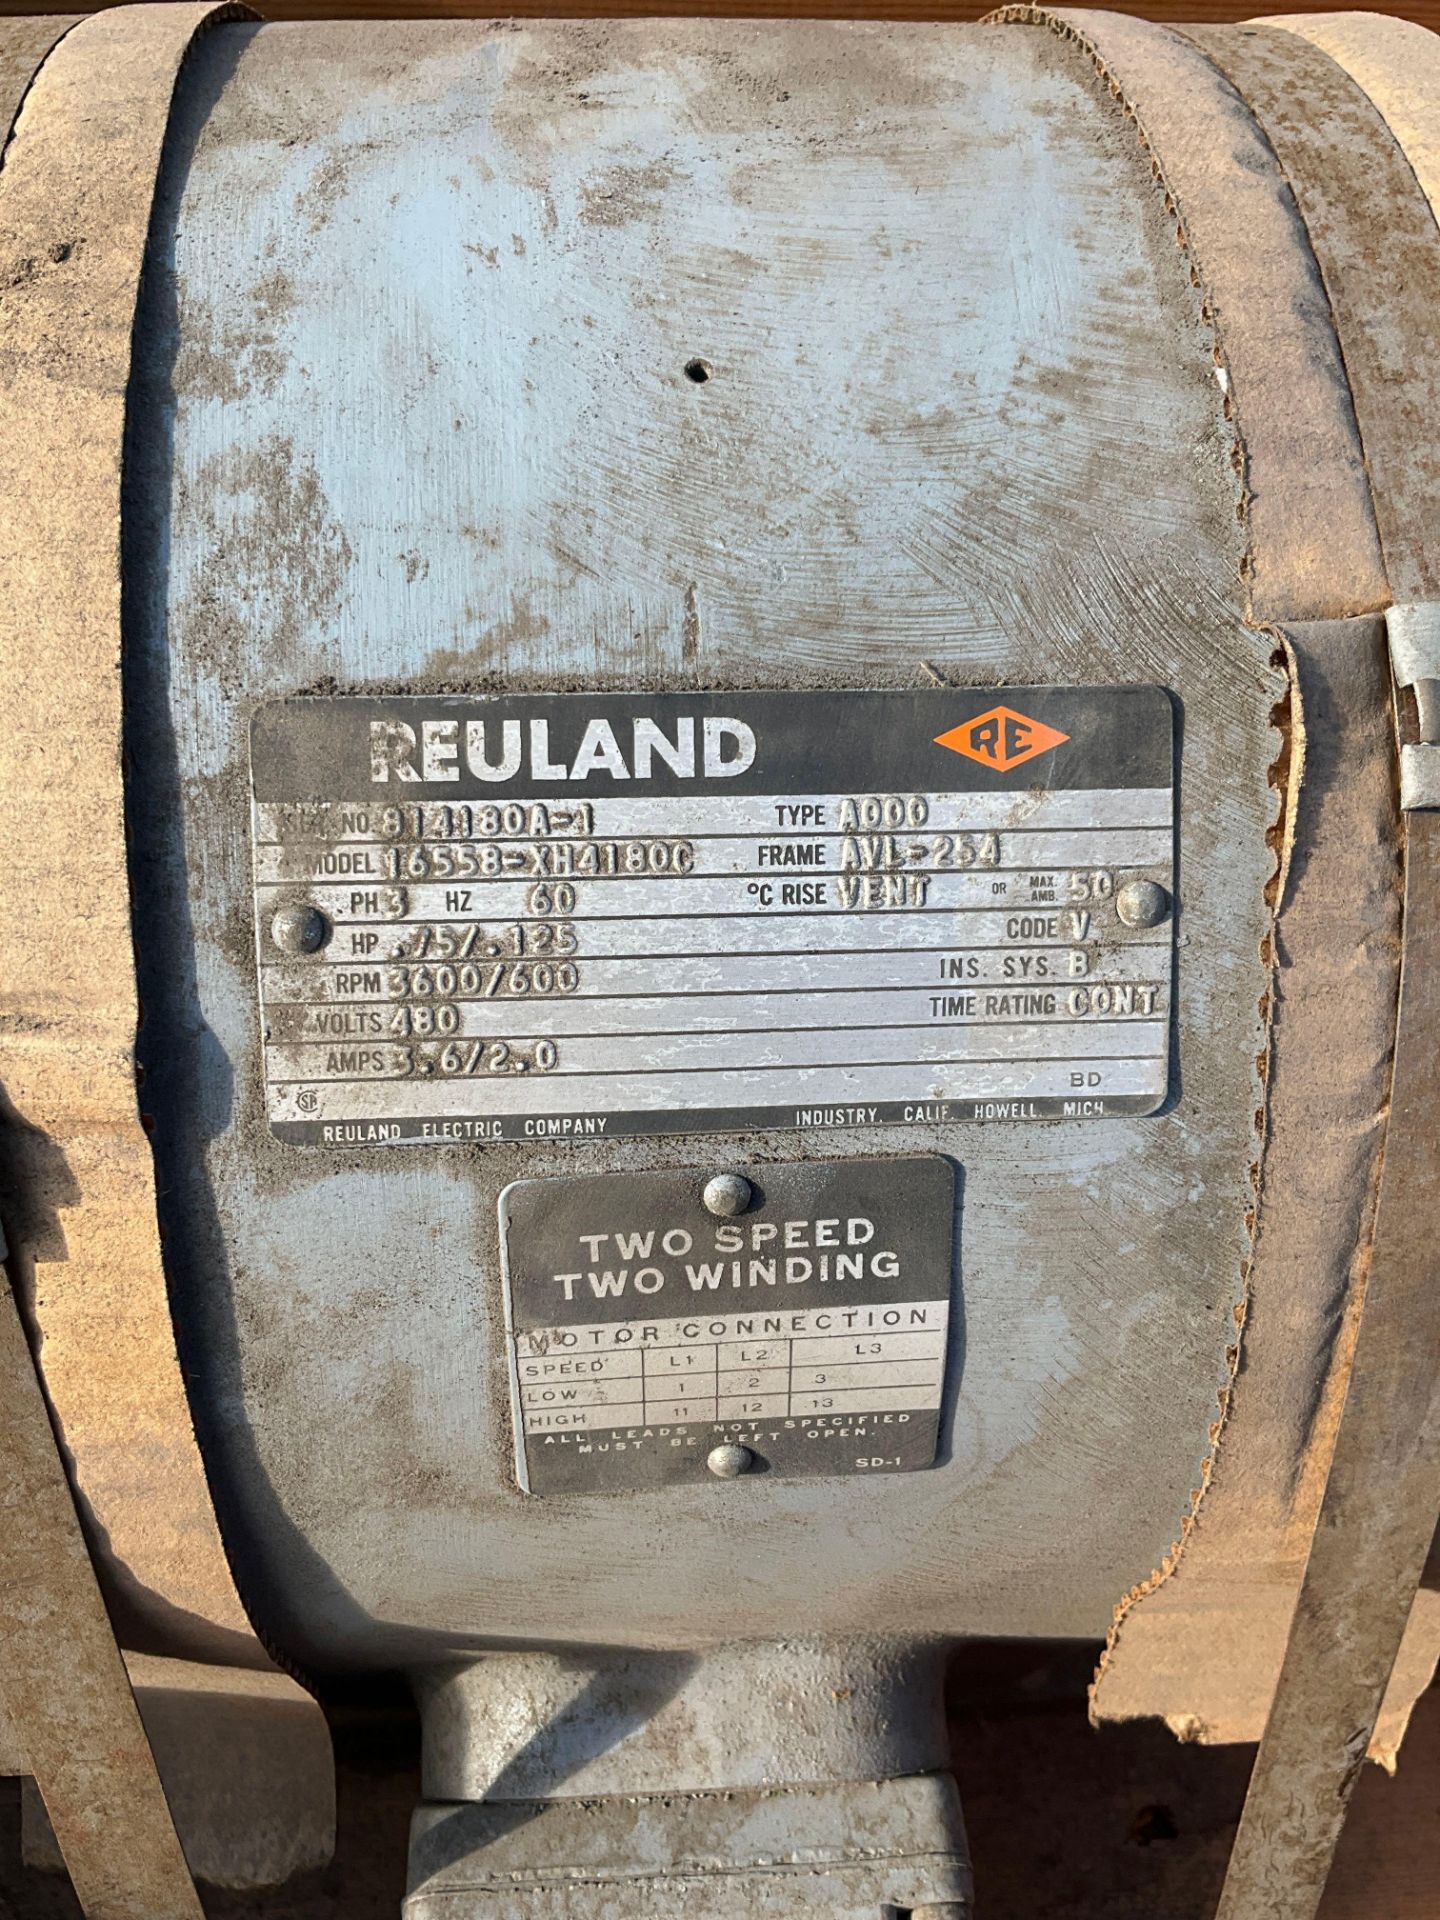 REULAND...MOTOR WITH MAGNETIC BREAK MODEL 16558-XH4180C, TYPE A000, 3 PHASE, 60 HZ, .75/.125 HP, - Image 3 of 6